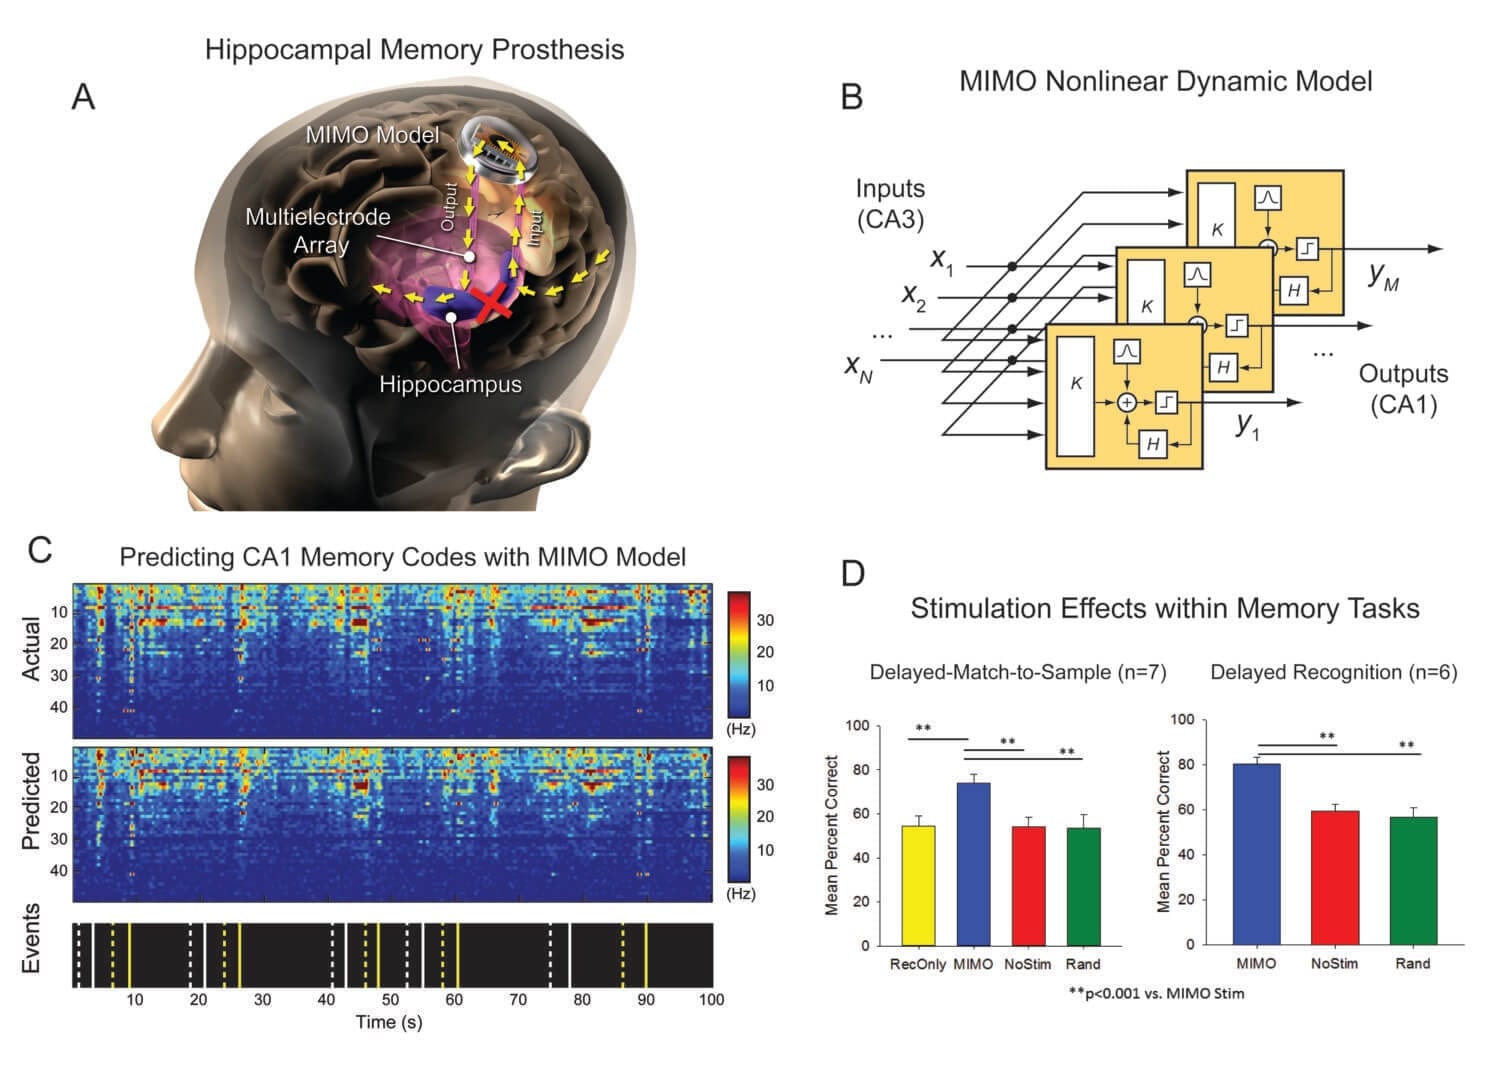 Prosthetic memory system for short-term memory performance showed a 35 to 37 percent improvement over baseline measurements